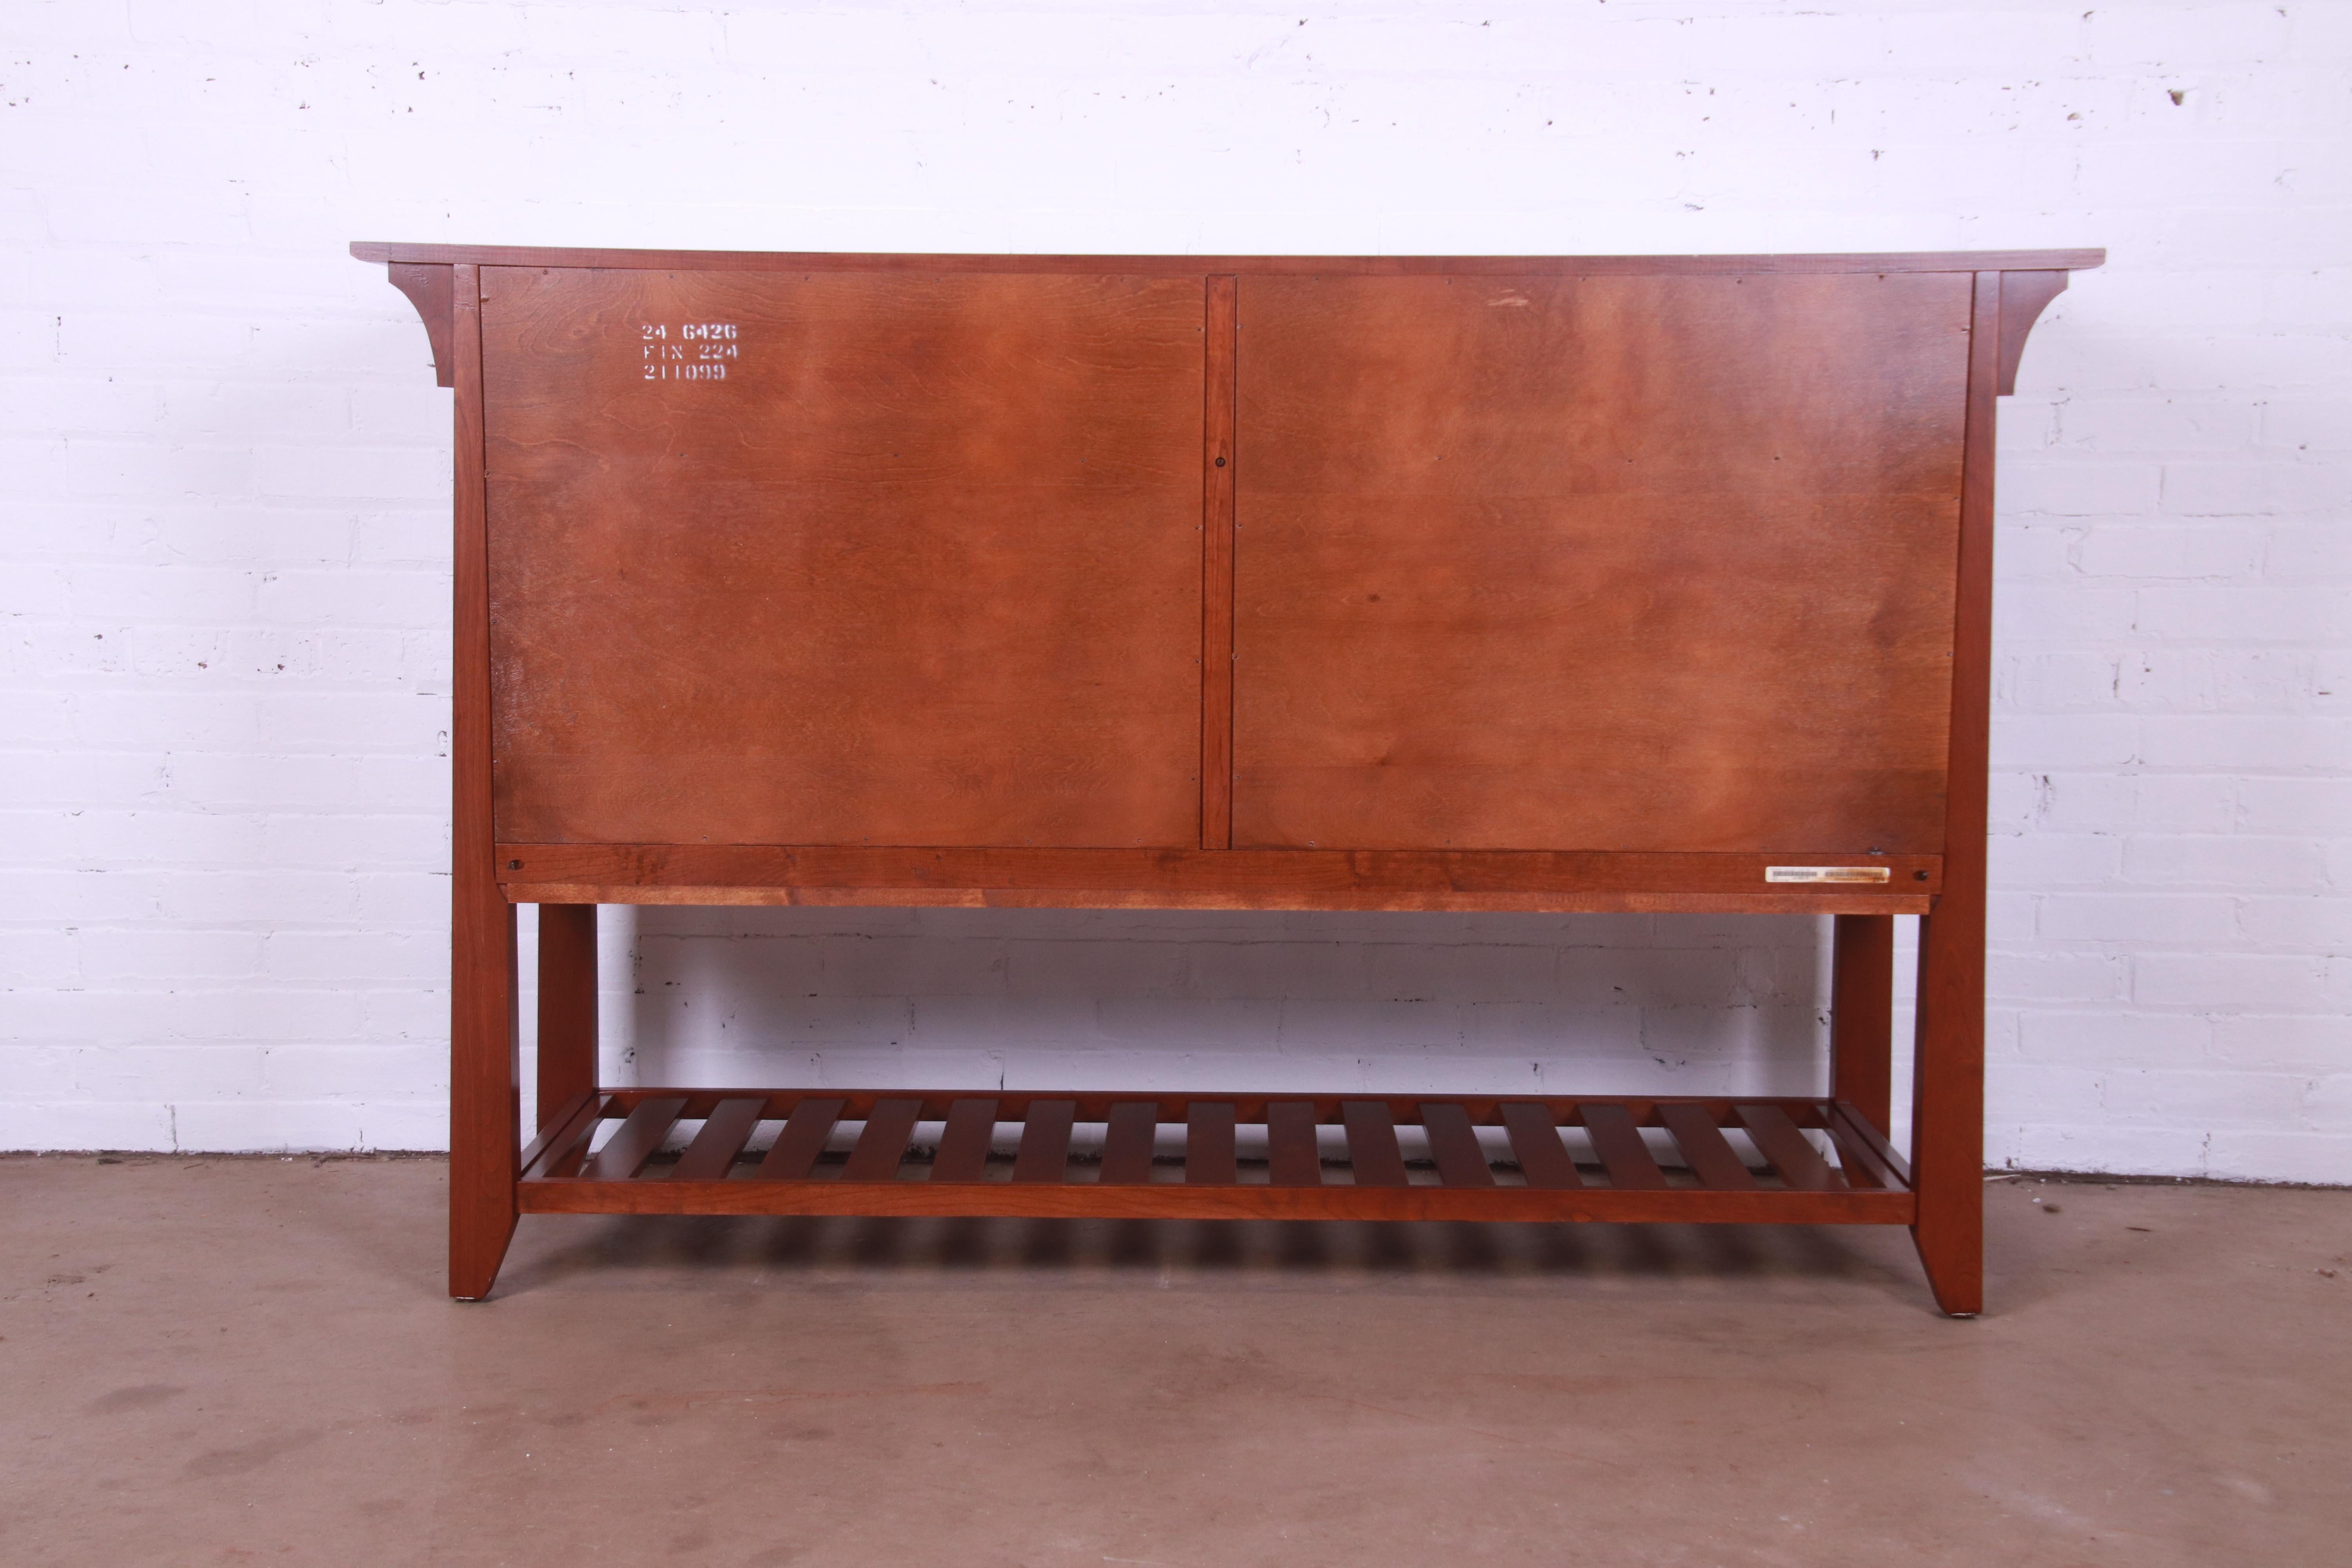 Ethan Allen Arts & Crafts Cherry Wood Sideboard or Bar Cabinet, Newly Refinished 10